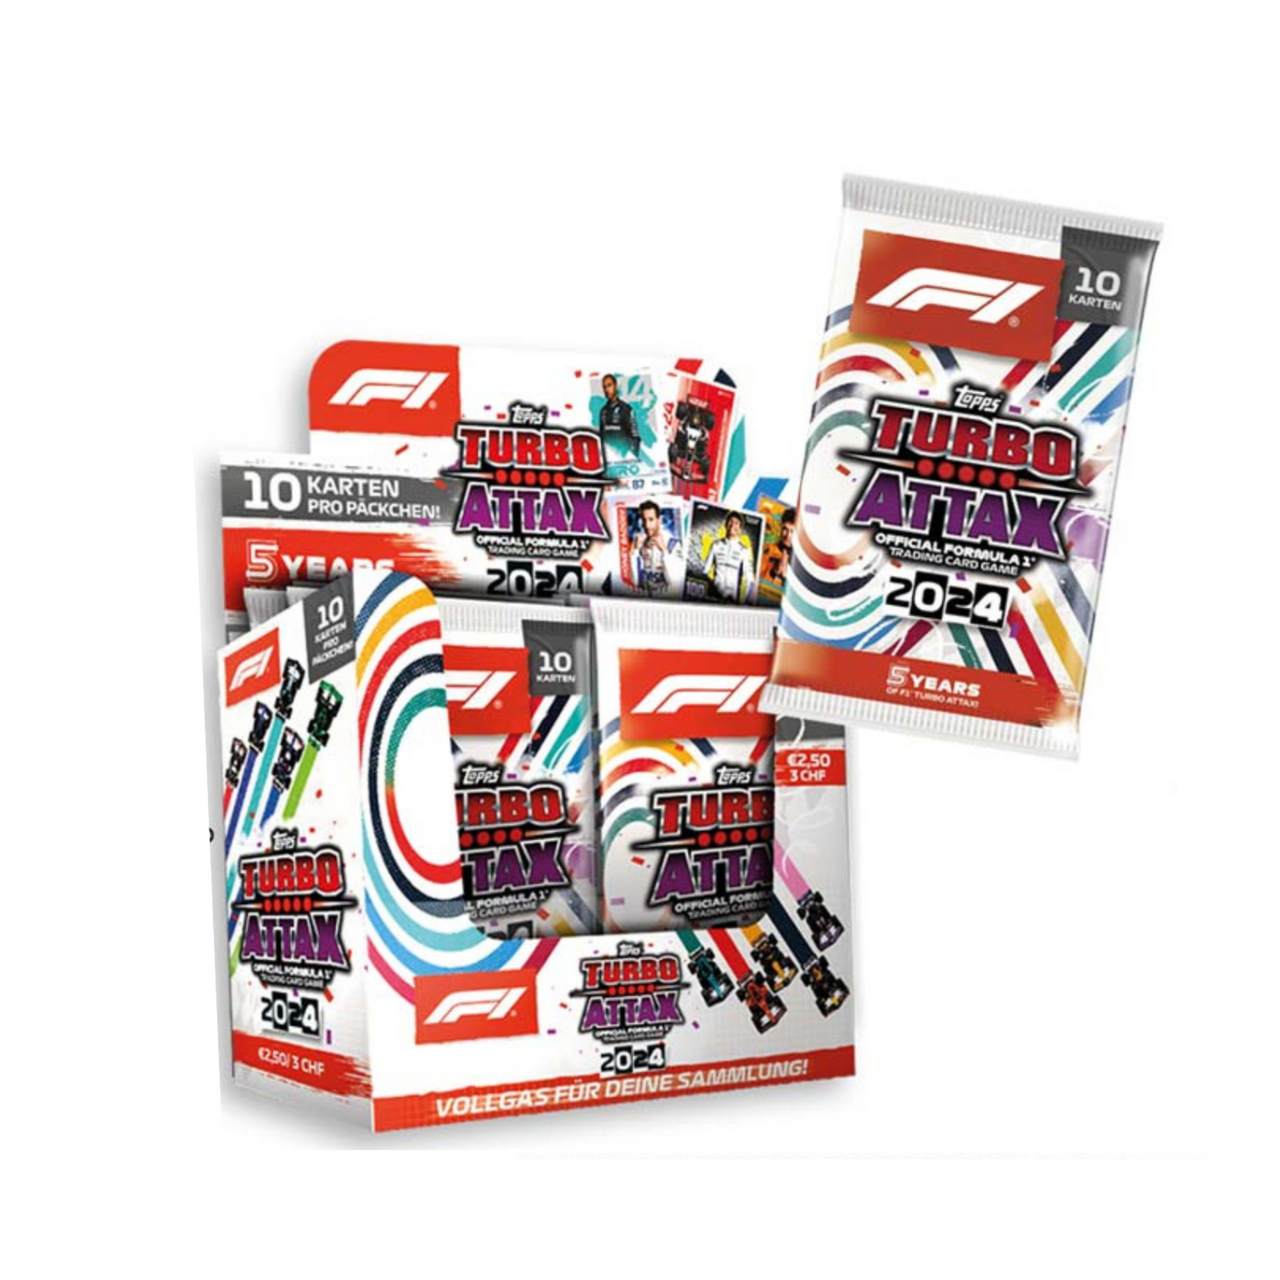 Formule 1 Topps Turbo Attax Collectie 2024 - Display Box